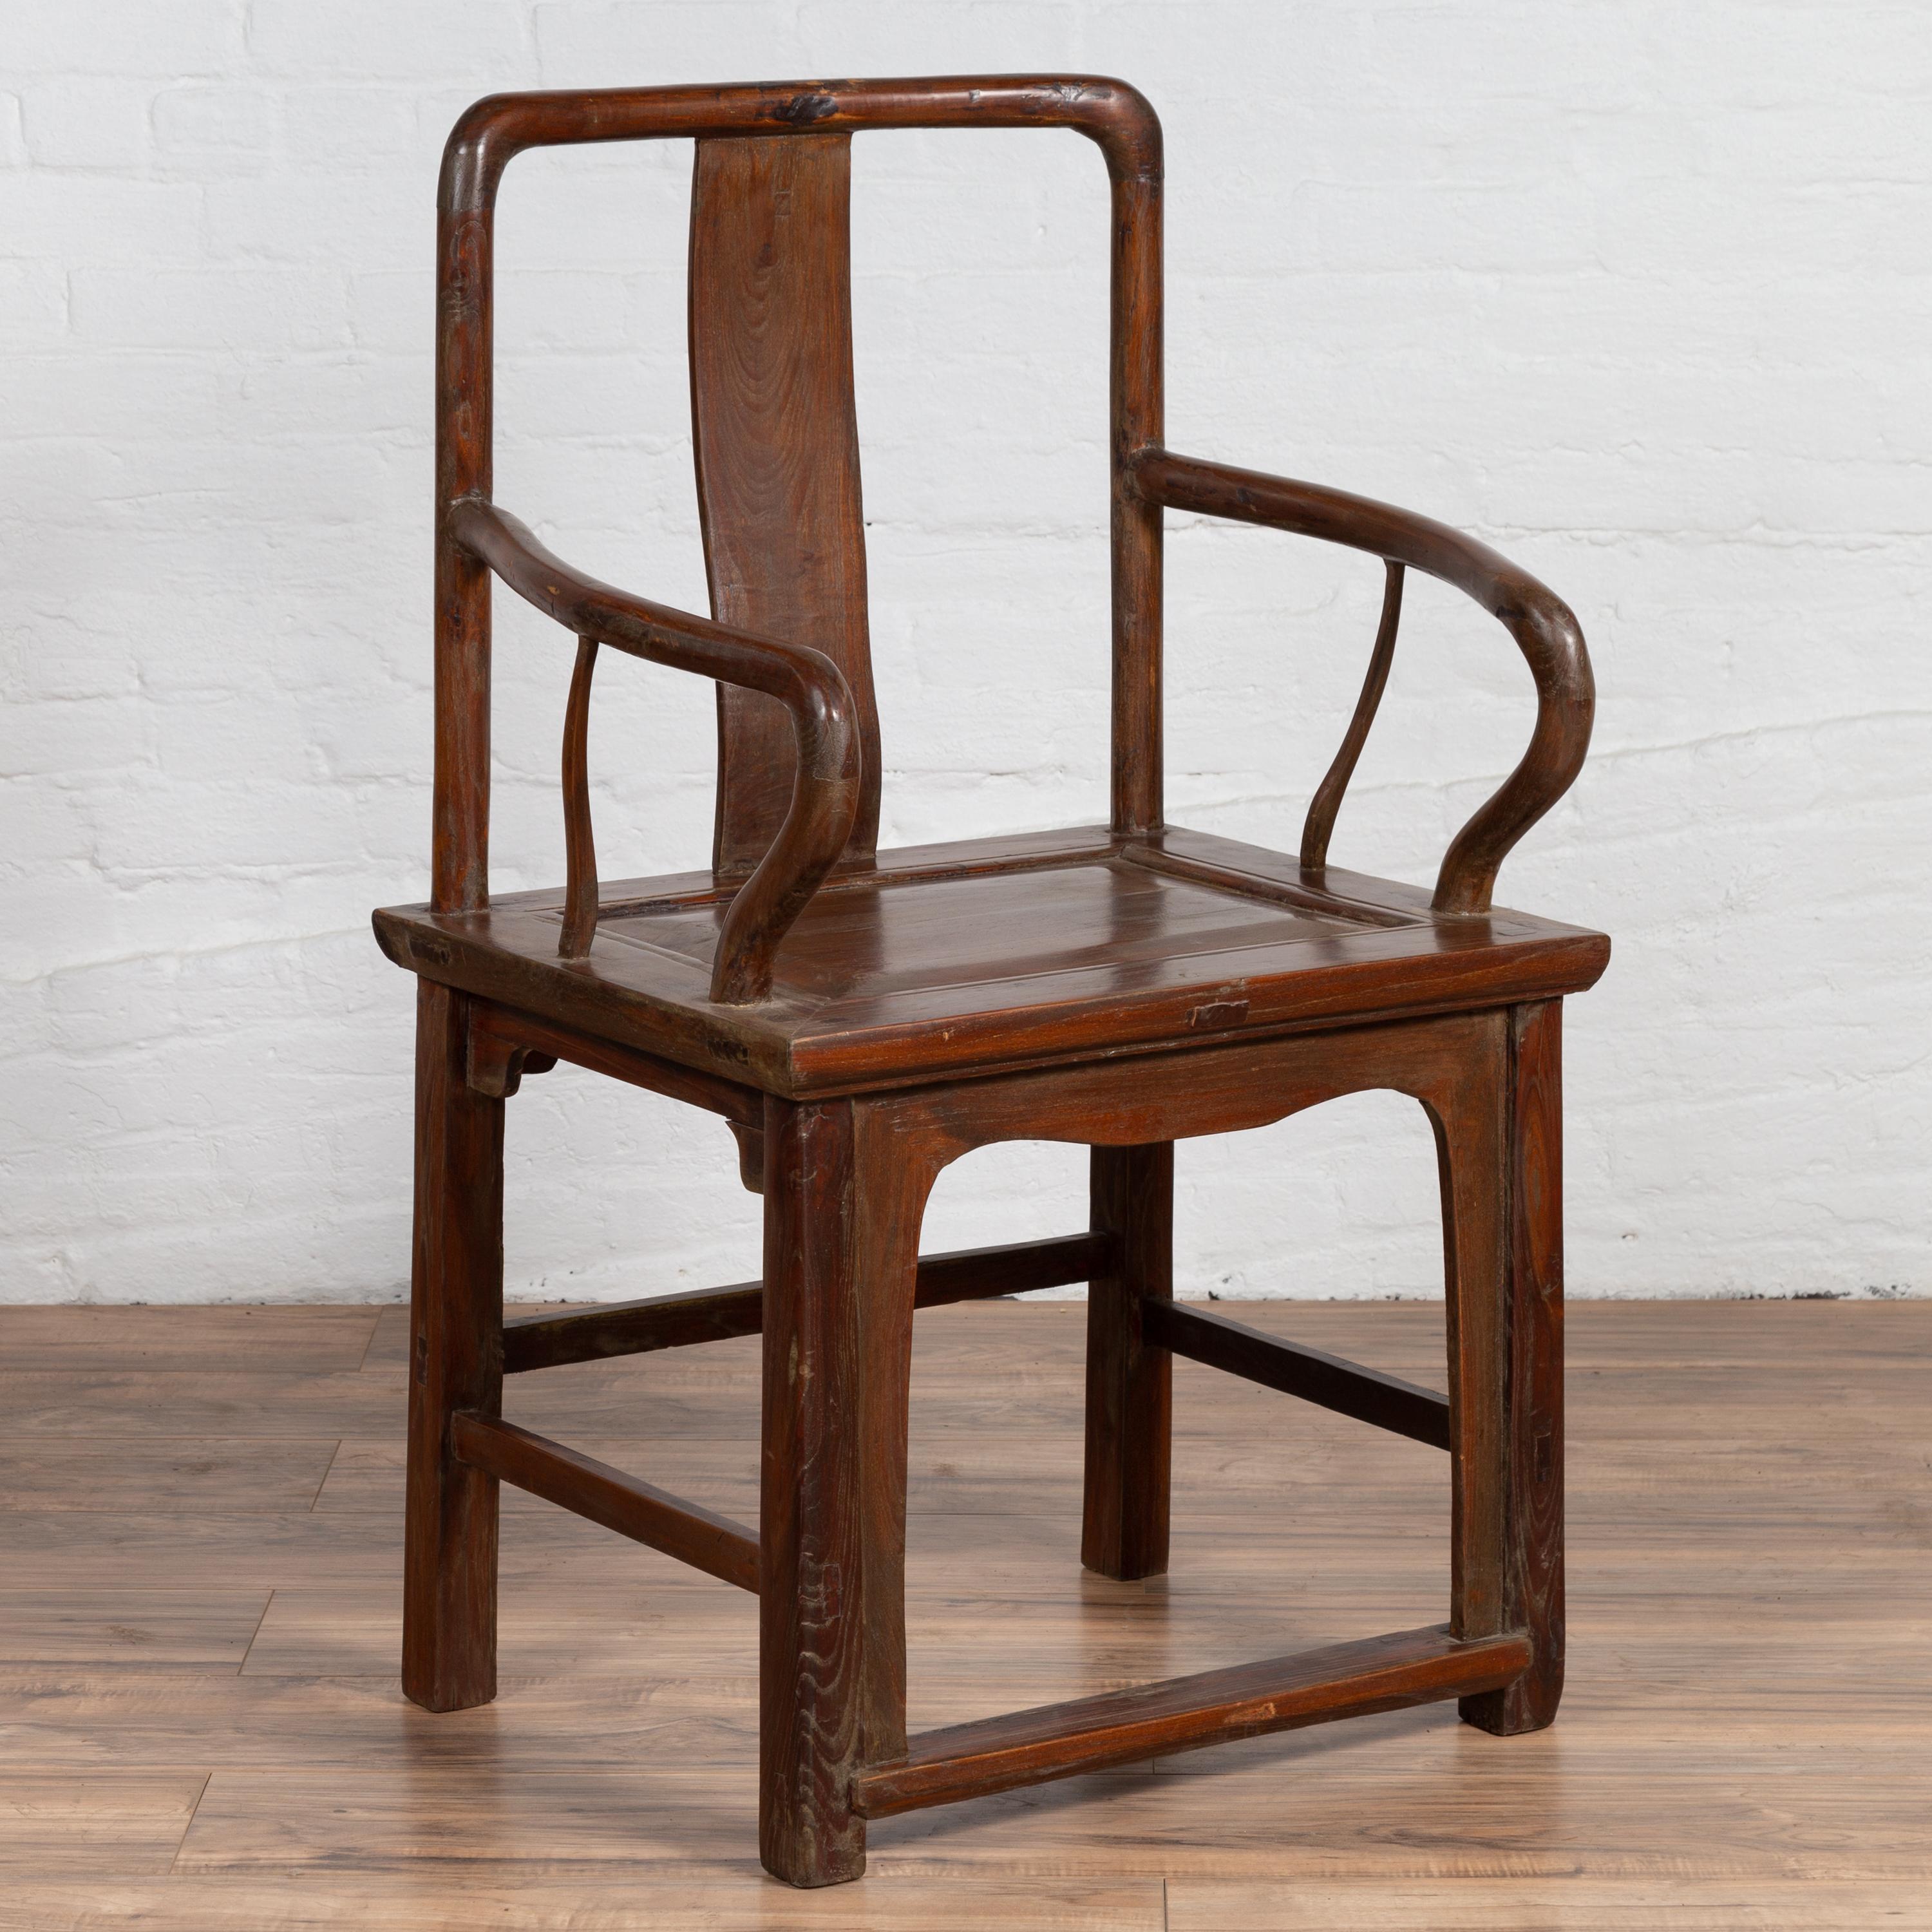 A Chinese antique Ming Dynasty style elmwood armchair from the early 20th century, with open back, central splat and curving armrests. Born in China during the early years of the 20th century, this exquisite armchair features an open back with